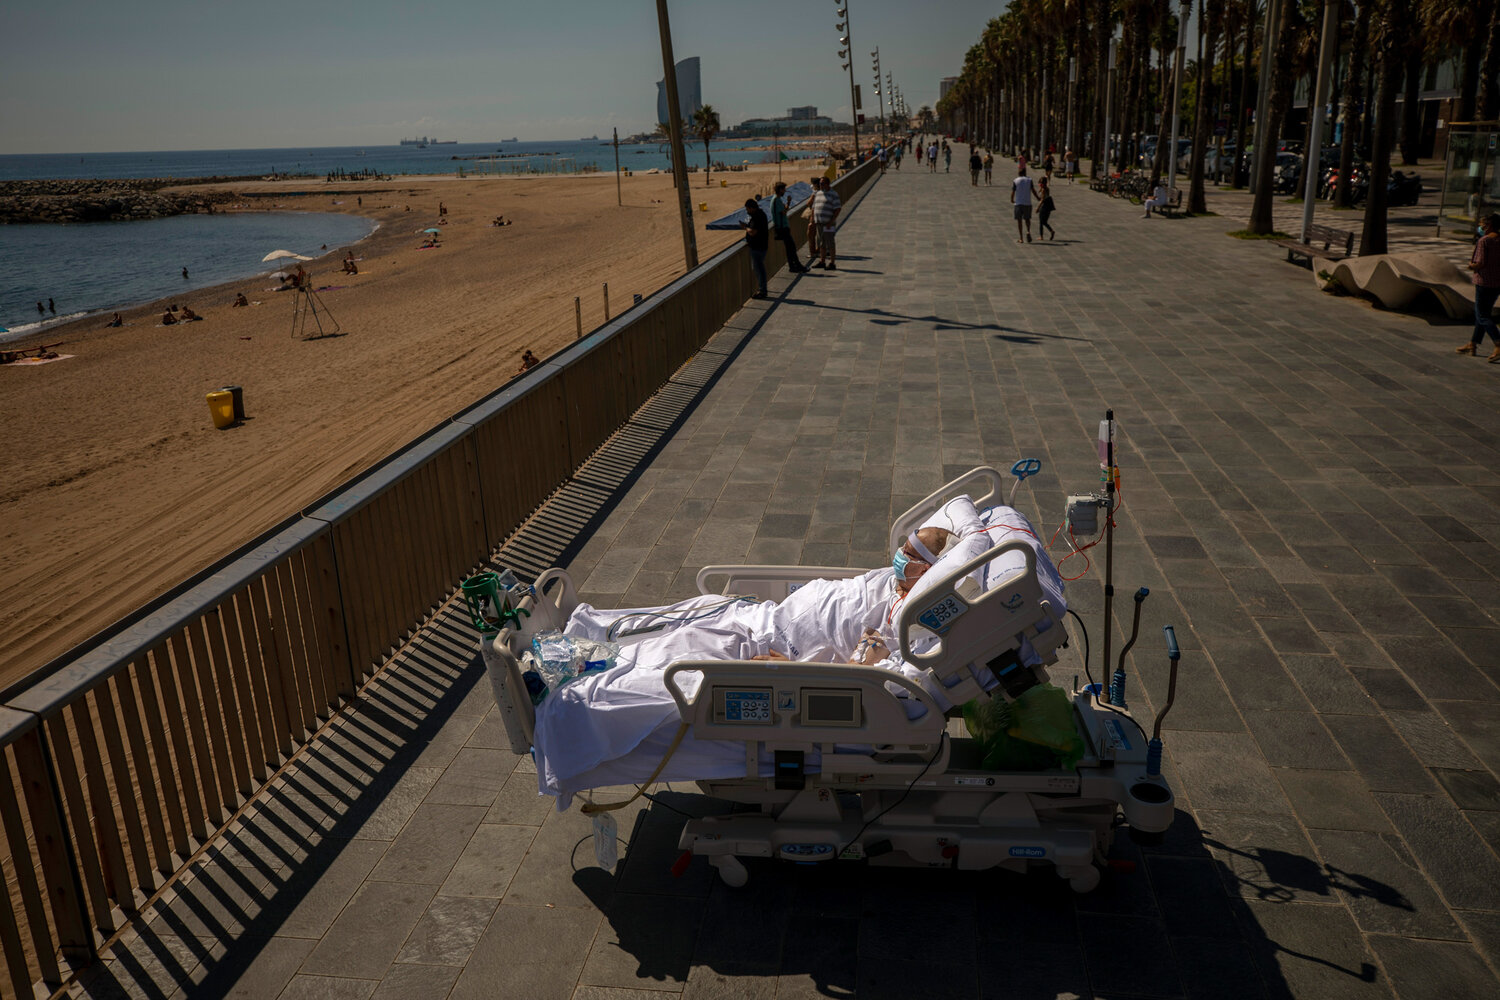  Francisco Espana looks at the Mediterranean sea from a promenade next to the Hospital del Mar in Barcelona, Spain, on Sept. 4, 2020. After 52 days in the hospital’s intensive care unit due to the coronavirus, Francisco was allowed by his doctors to spend almost ten minutes at the seaside as part of his recovery therapy. (AP Photo/Emilio Morenatti) 